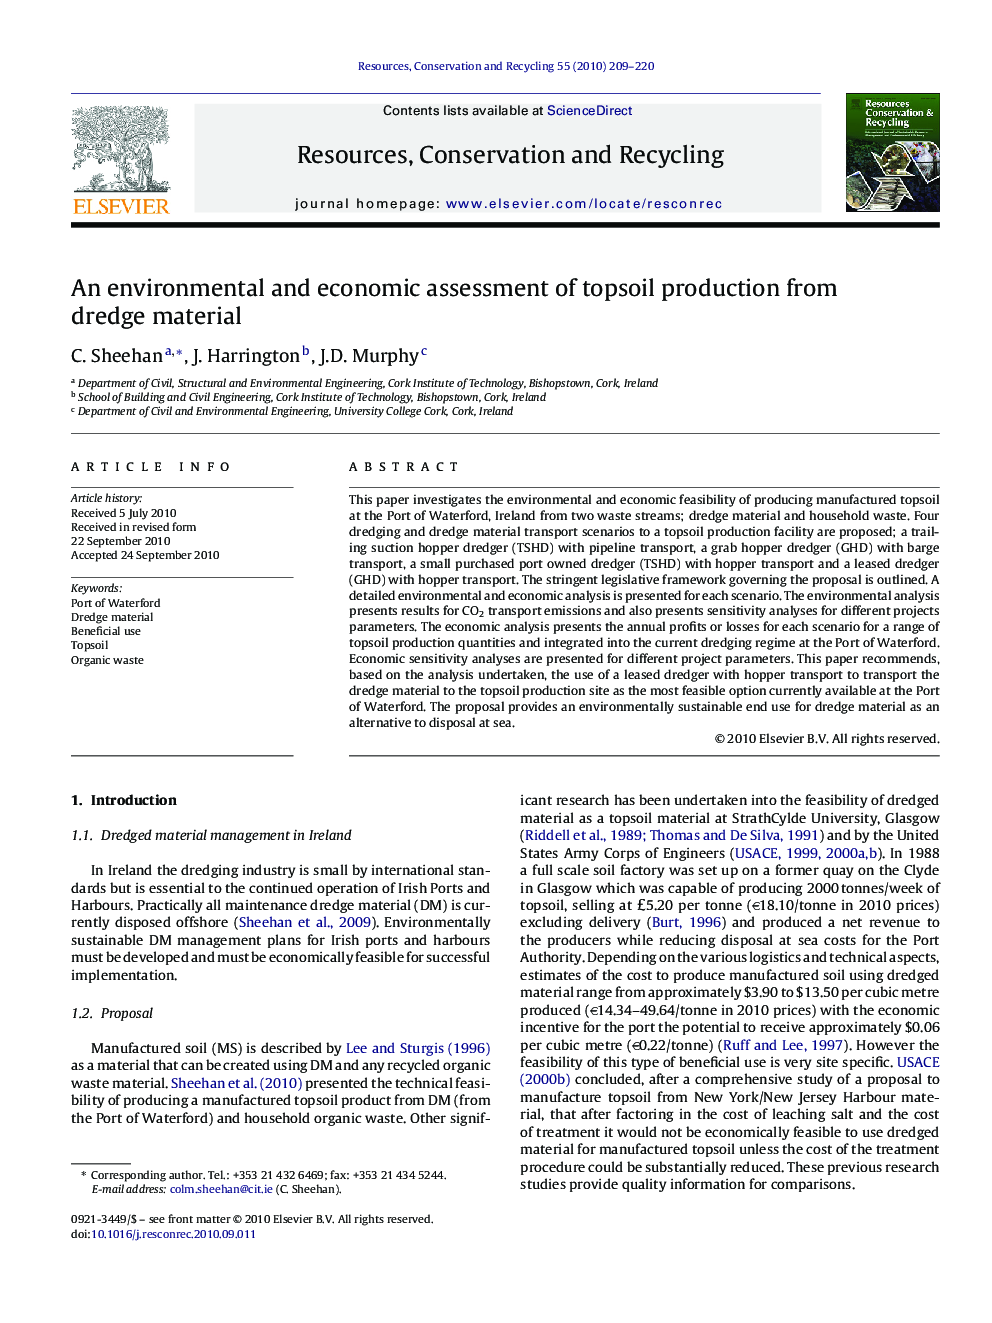 An environmental and economic assessment of topsoil production from dredge material